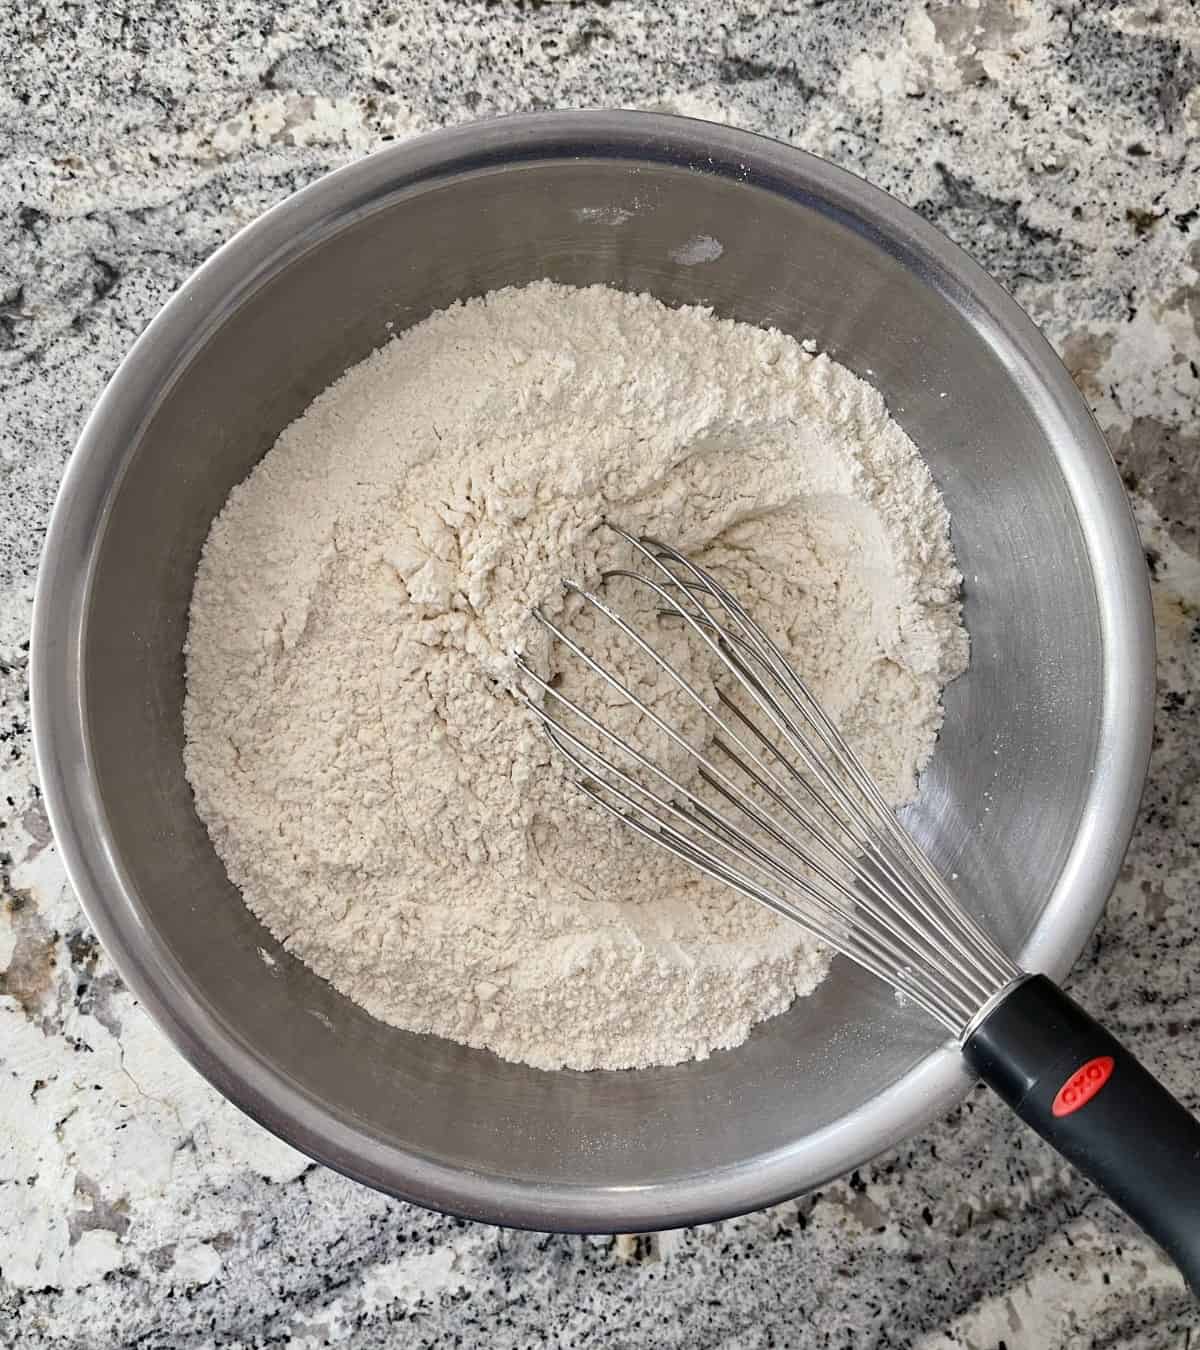 All-purpose flour, cream of tartar and baking soda in mixing bowl with whisk.